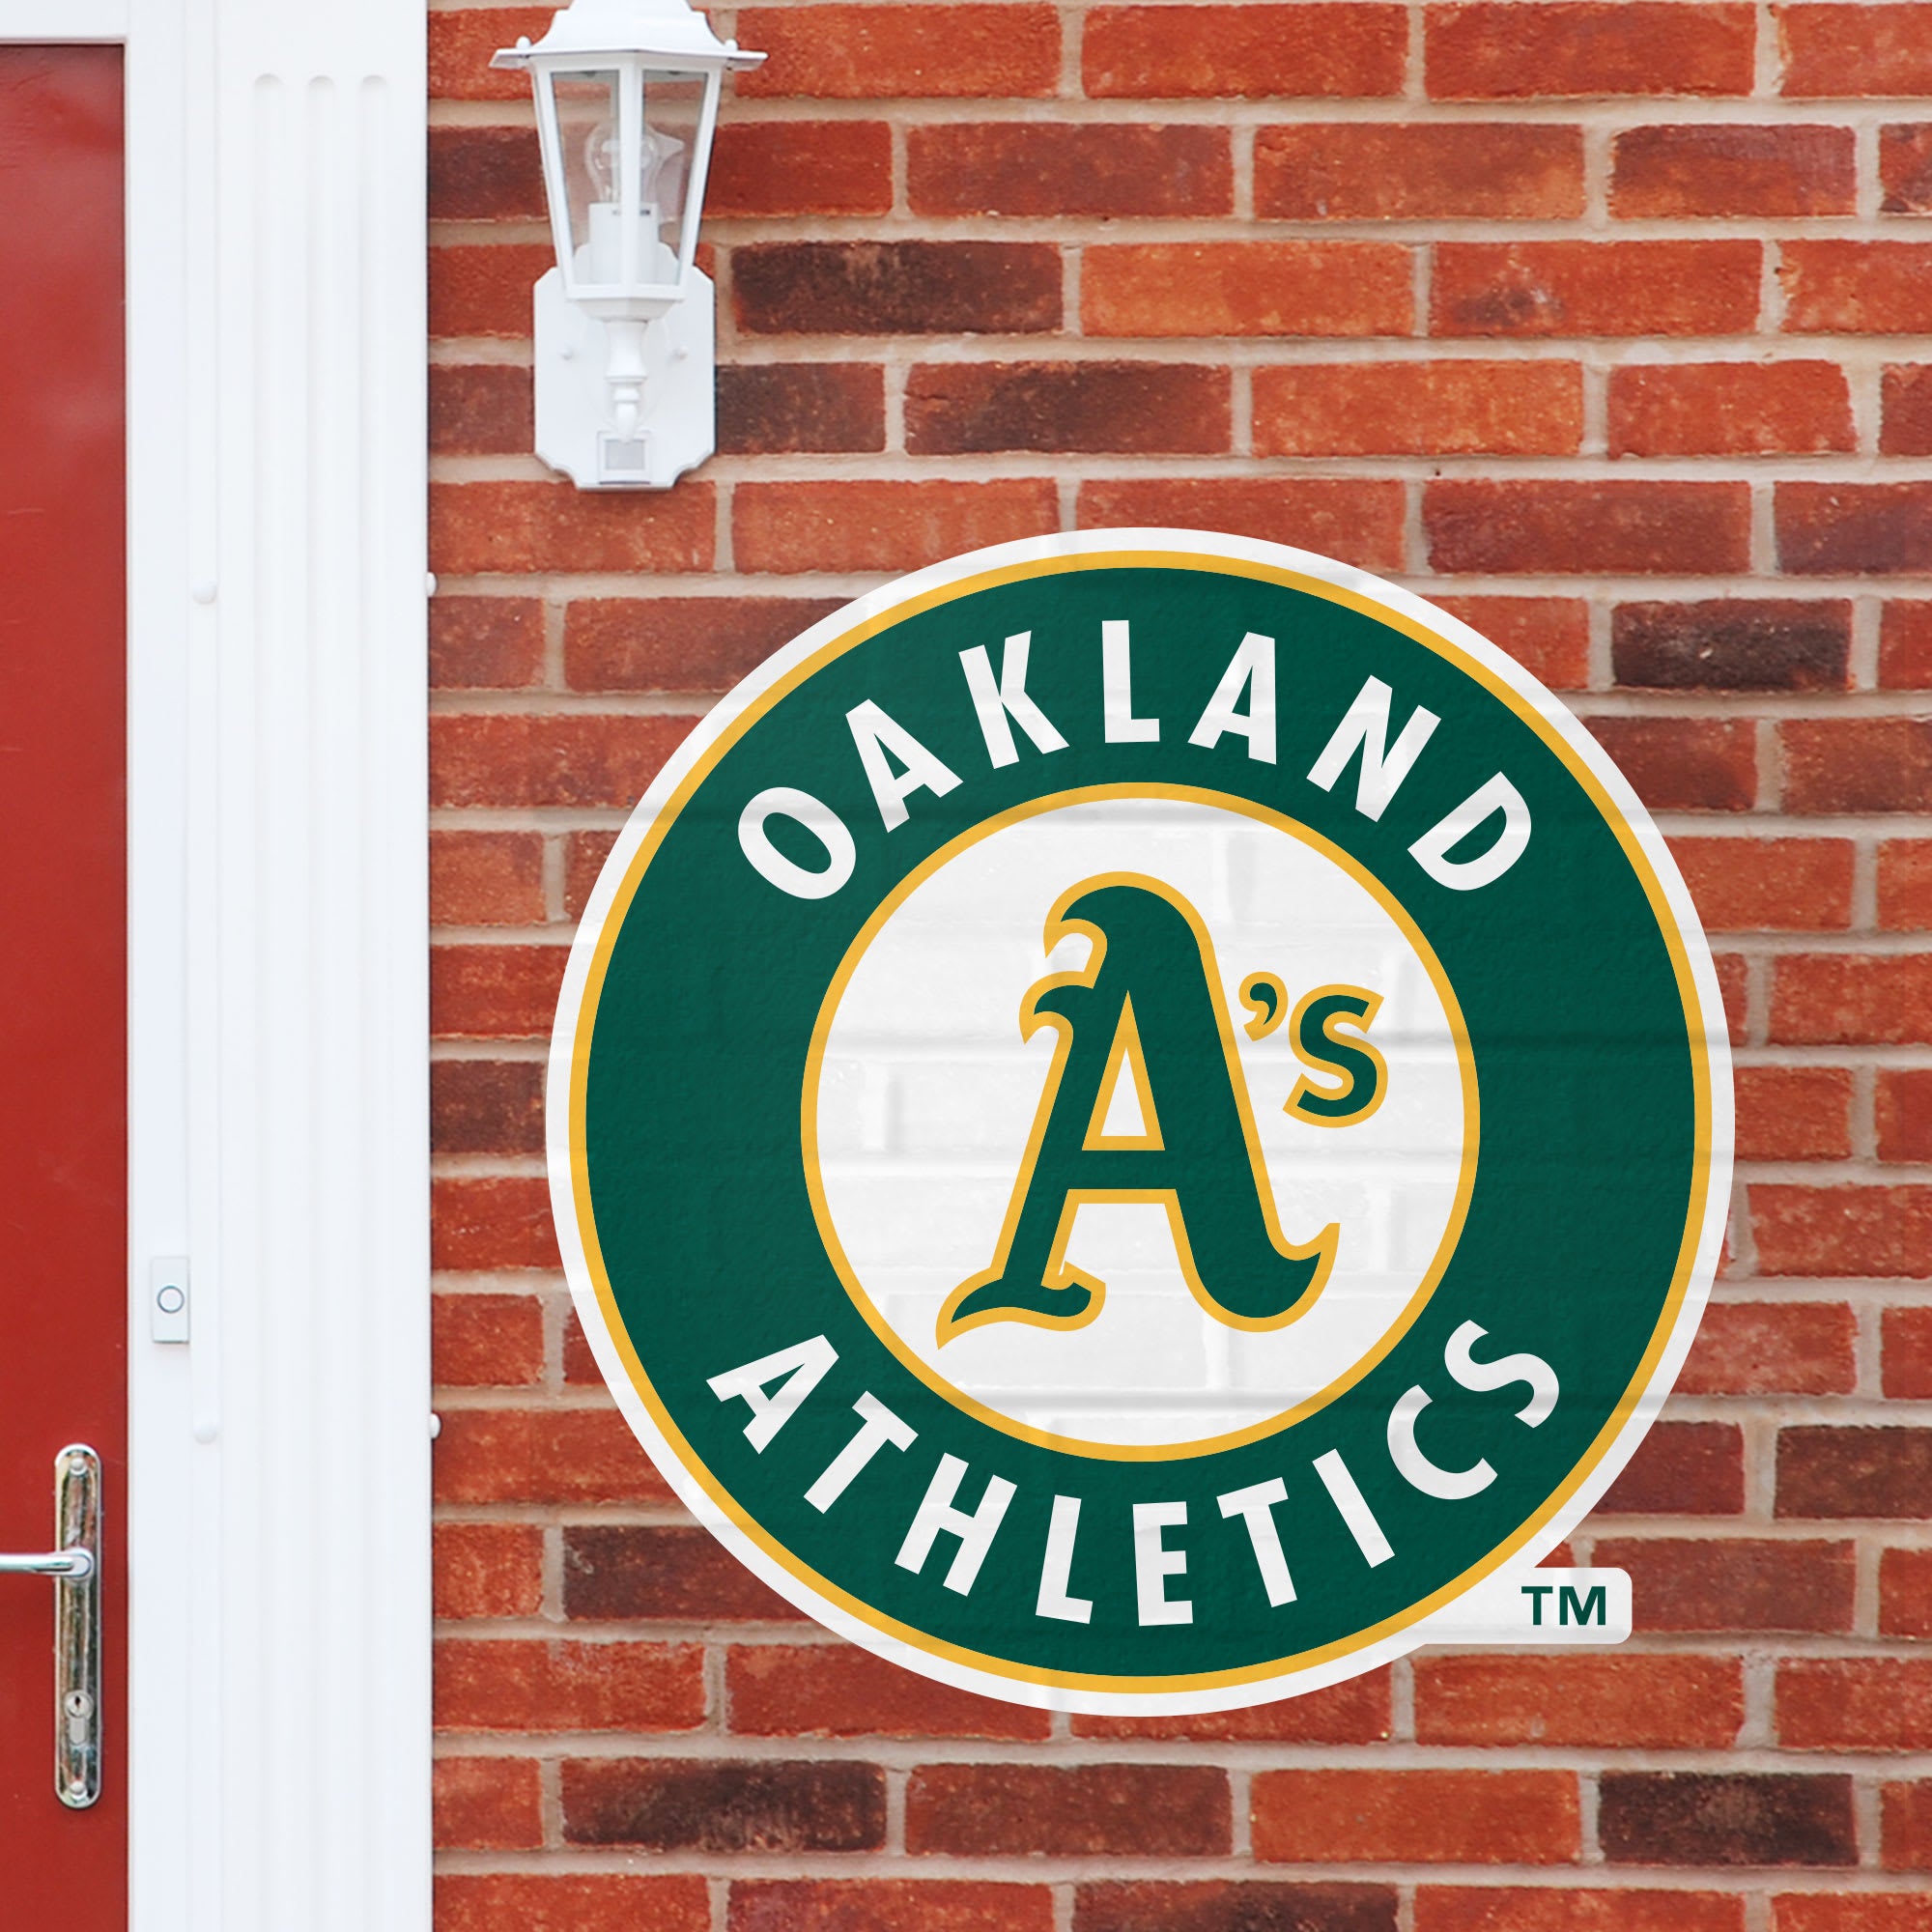 Oakland Athletics: Logo - Officially Licensed MLB Outdoor Graphic Giant Logo (30"W x 30"H) by Fathead | Wood/Aluminum